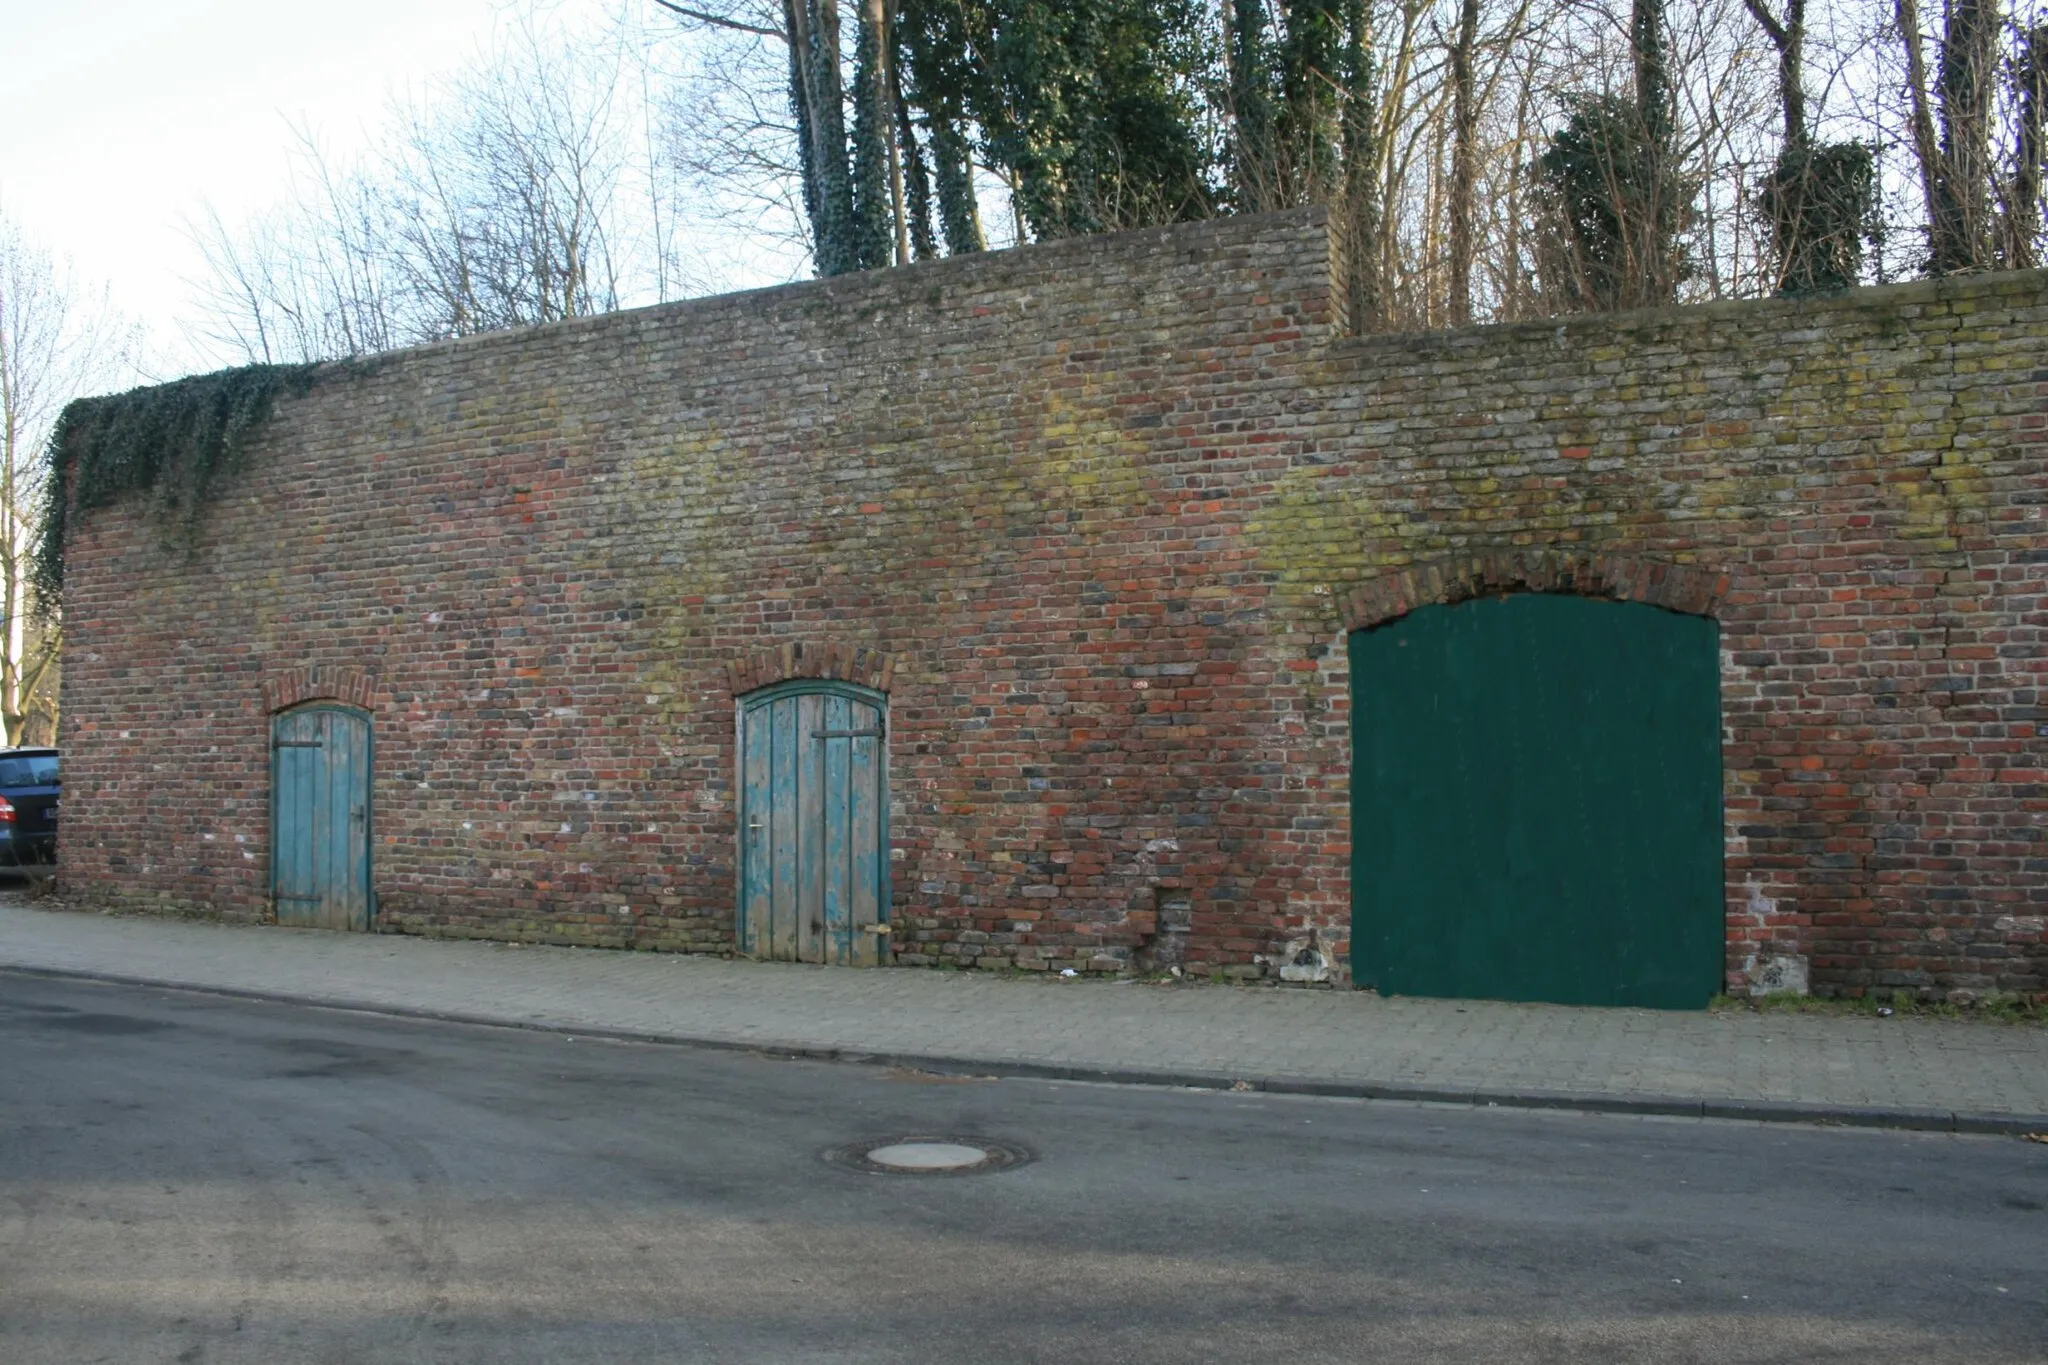 Photo showing: Cultural heritage monument No. 61 in Jülich